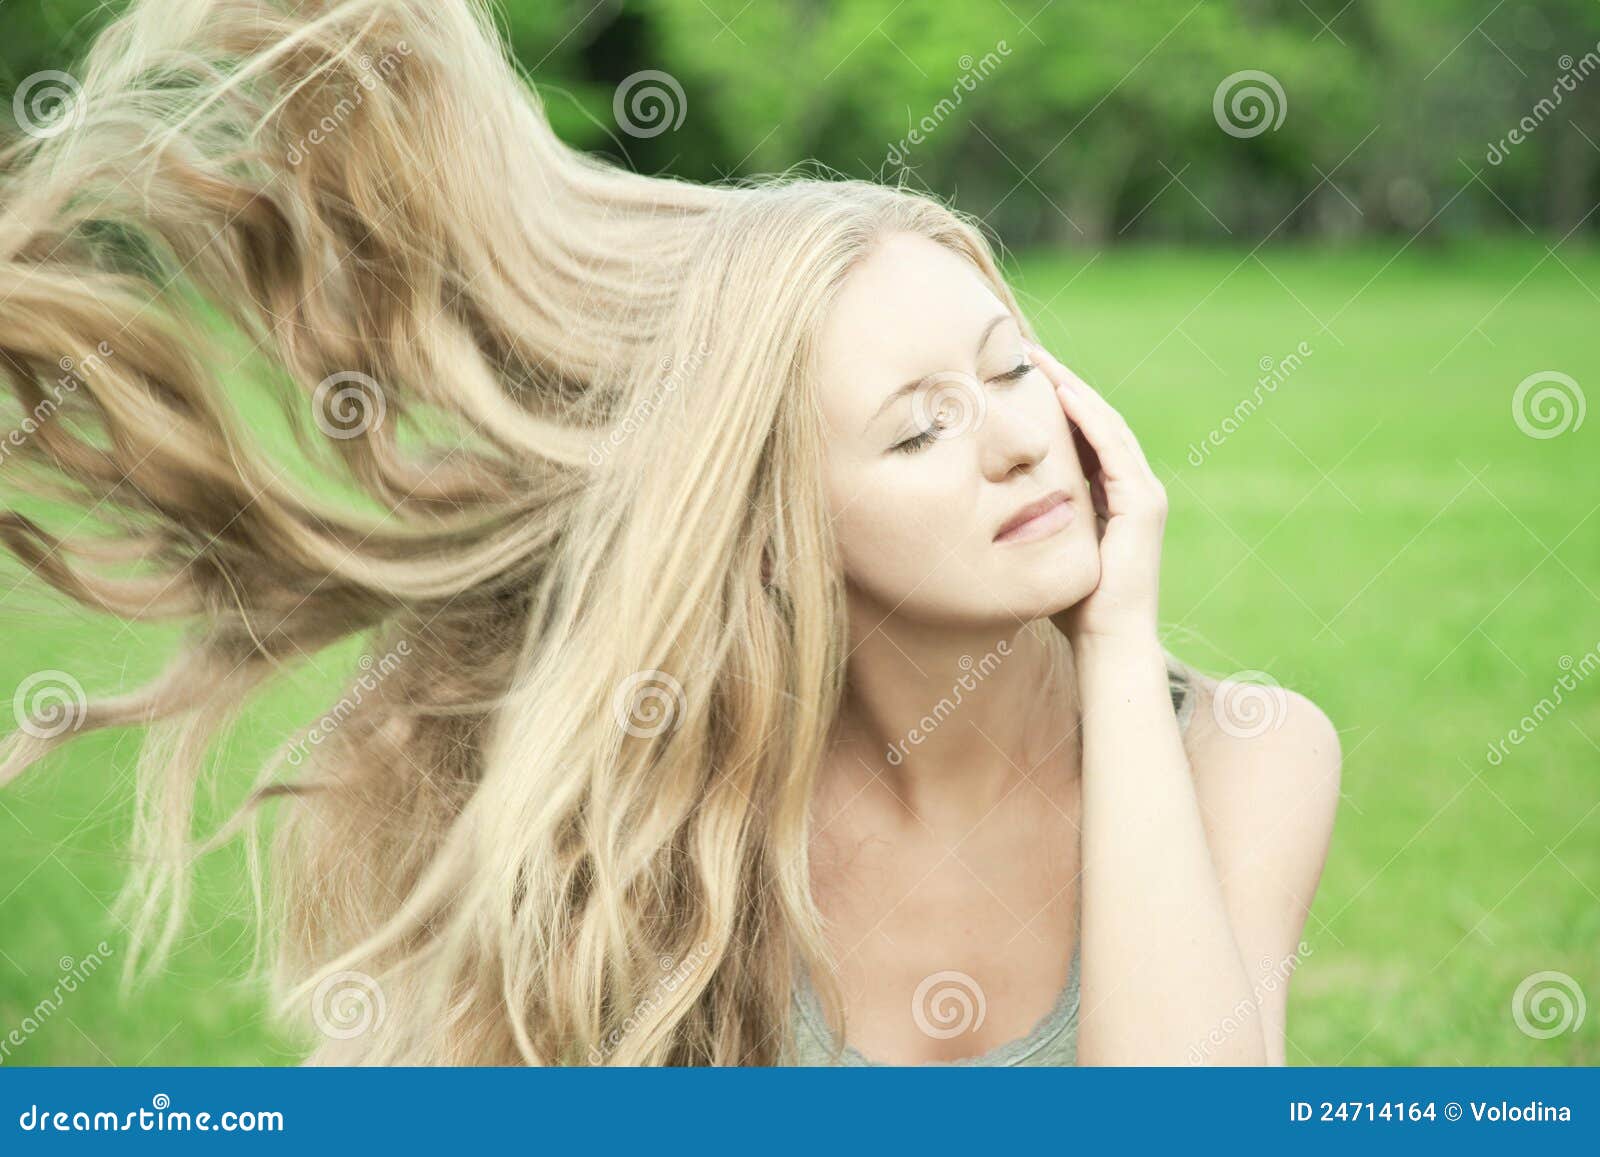 Long blonde hair in nature - wide 1